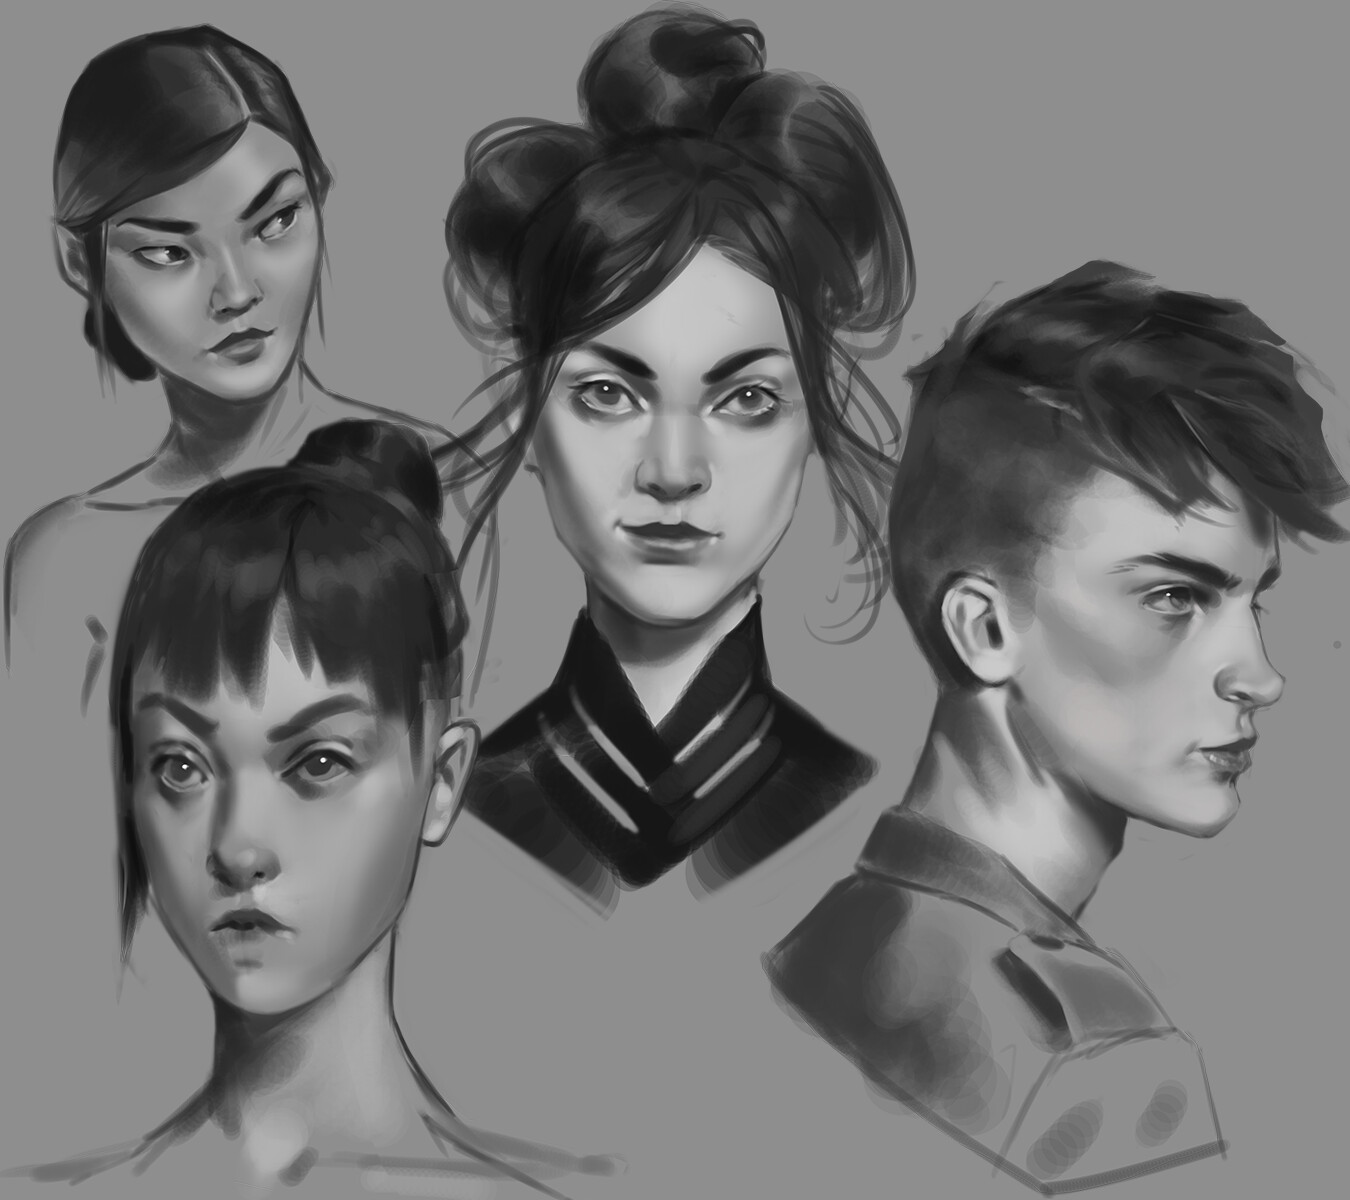 misc heads both from reference and not.